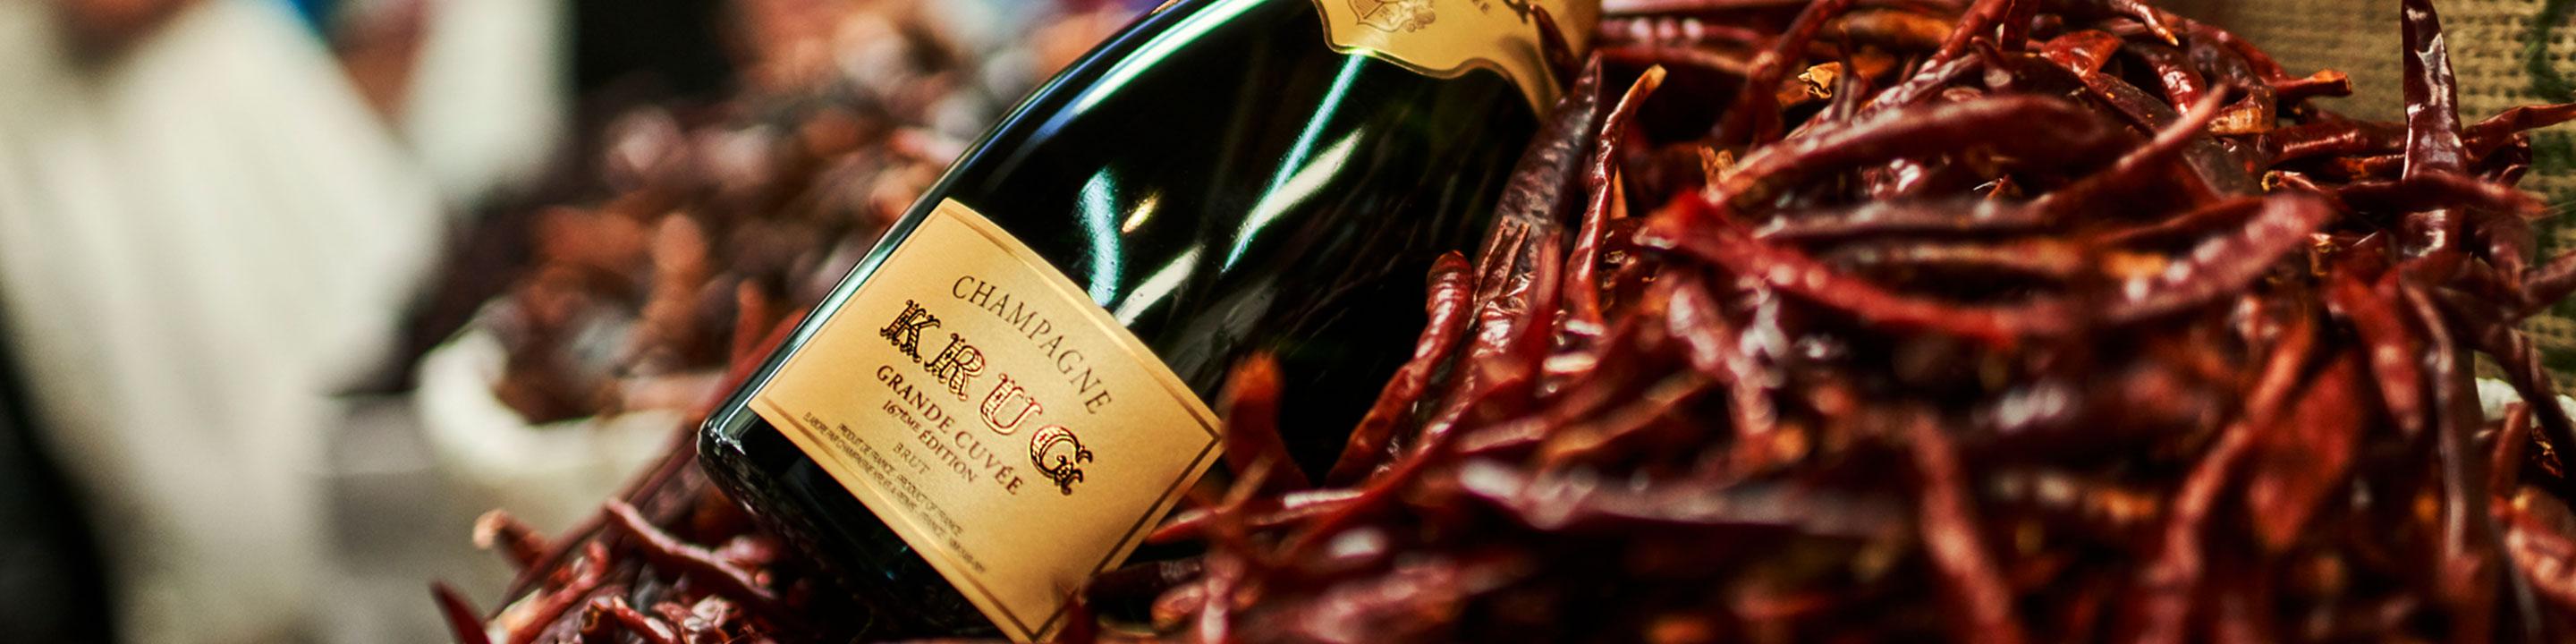 From its very inception, Krug would be first in creating only prestige Champagnes every year, a still unique and defining trait of Krug to this day.